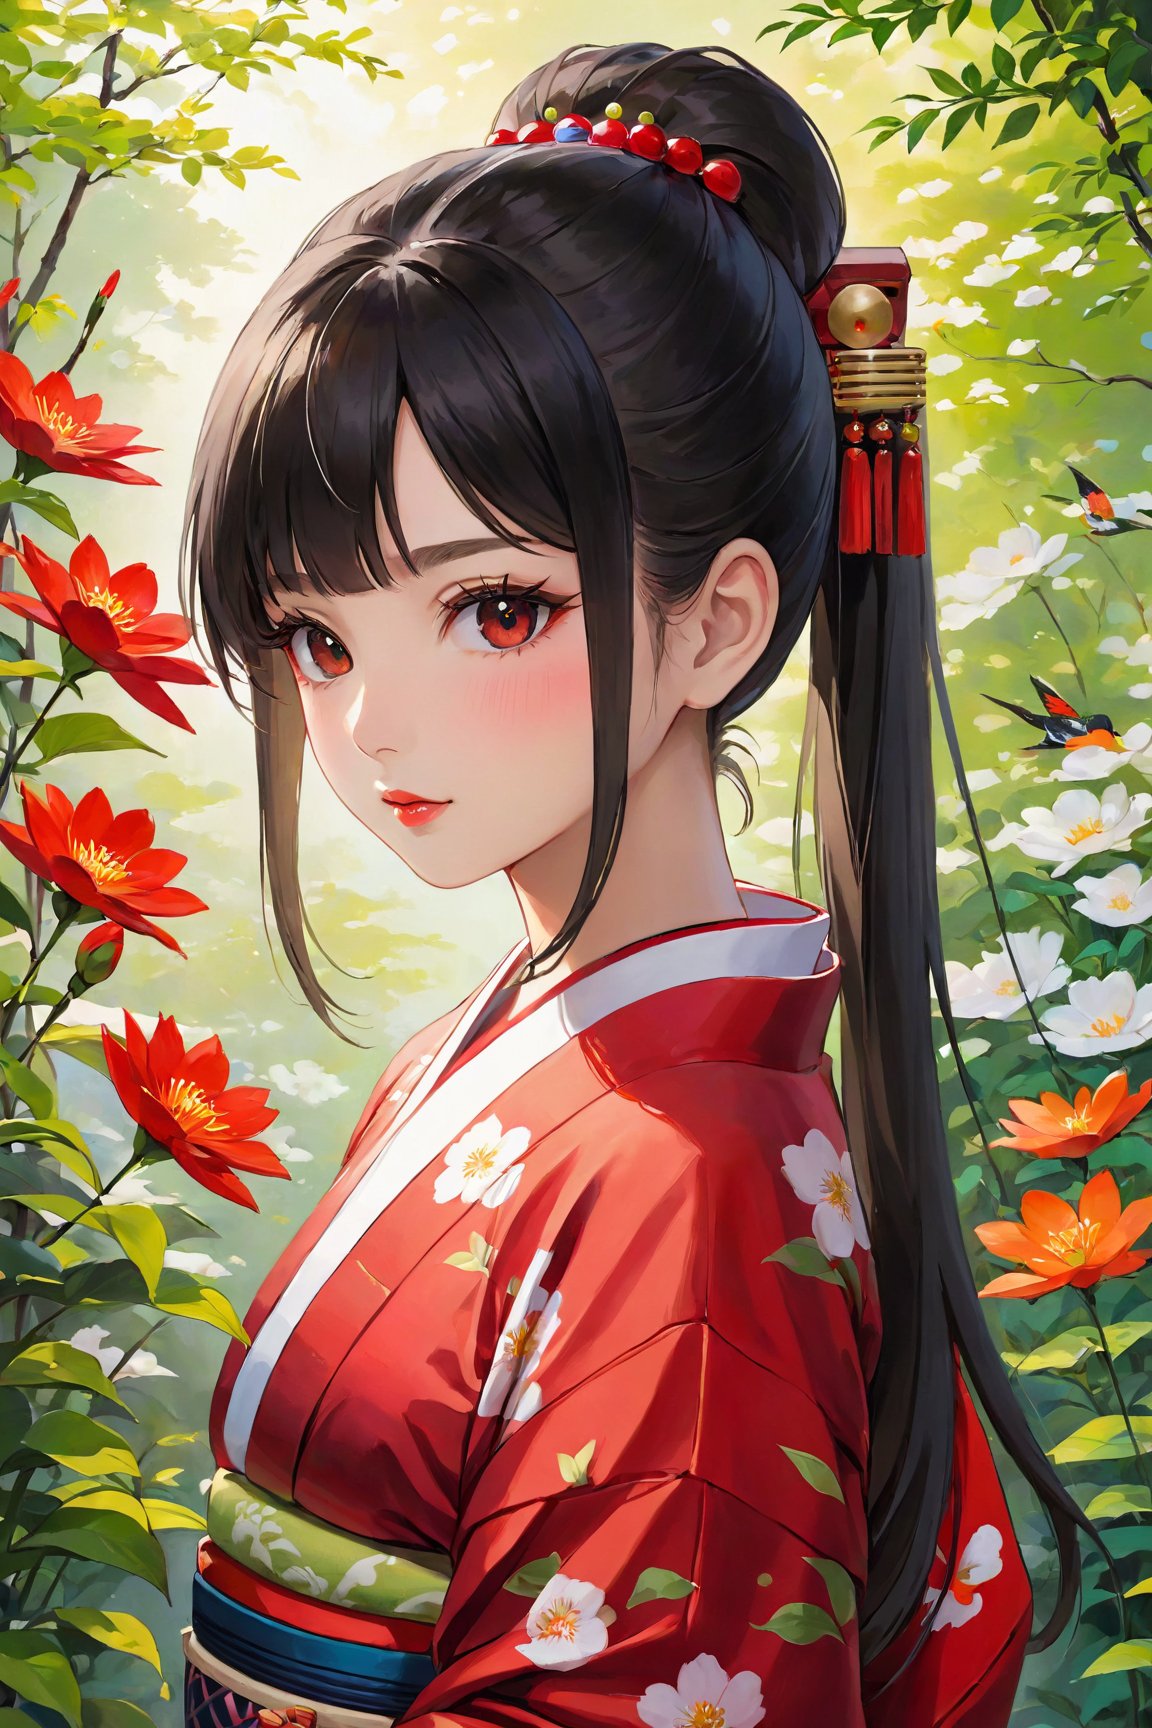 1girl, beautiful detailed eyes, beautiful detailed lips, extremely detailed eyebrows and face, long eyelashes, stripe bead necklace, black hair styled in a spiked ponytail, wearing a simple kimono with red open clothes. The artwork is created using oil paint on canvas, with high resolution and ultra-detailed brushstrokes. The painting showcases a picturesque garden scene with vibrant colors and vivid flowers in full bloom. The girl is depicted standing gracefully amidst the floral landscape, her posture conveying a sense of tranquility and elegance. The lighting in the painting is soft and ethereal, casting gentle shadows on the girl's face and adding depth to the overall composition. The color palette is dominated by various shades of red, creating a warm and inviting atmosphere. The art style blends elements of traditional Japanese art with a touch of contemporary flair, resulting in a captivating fusion of East-meets-West aesthetics.